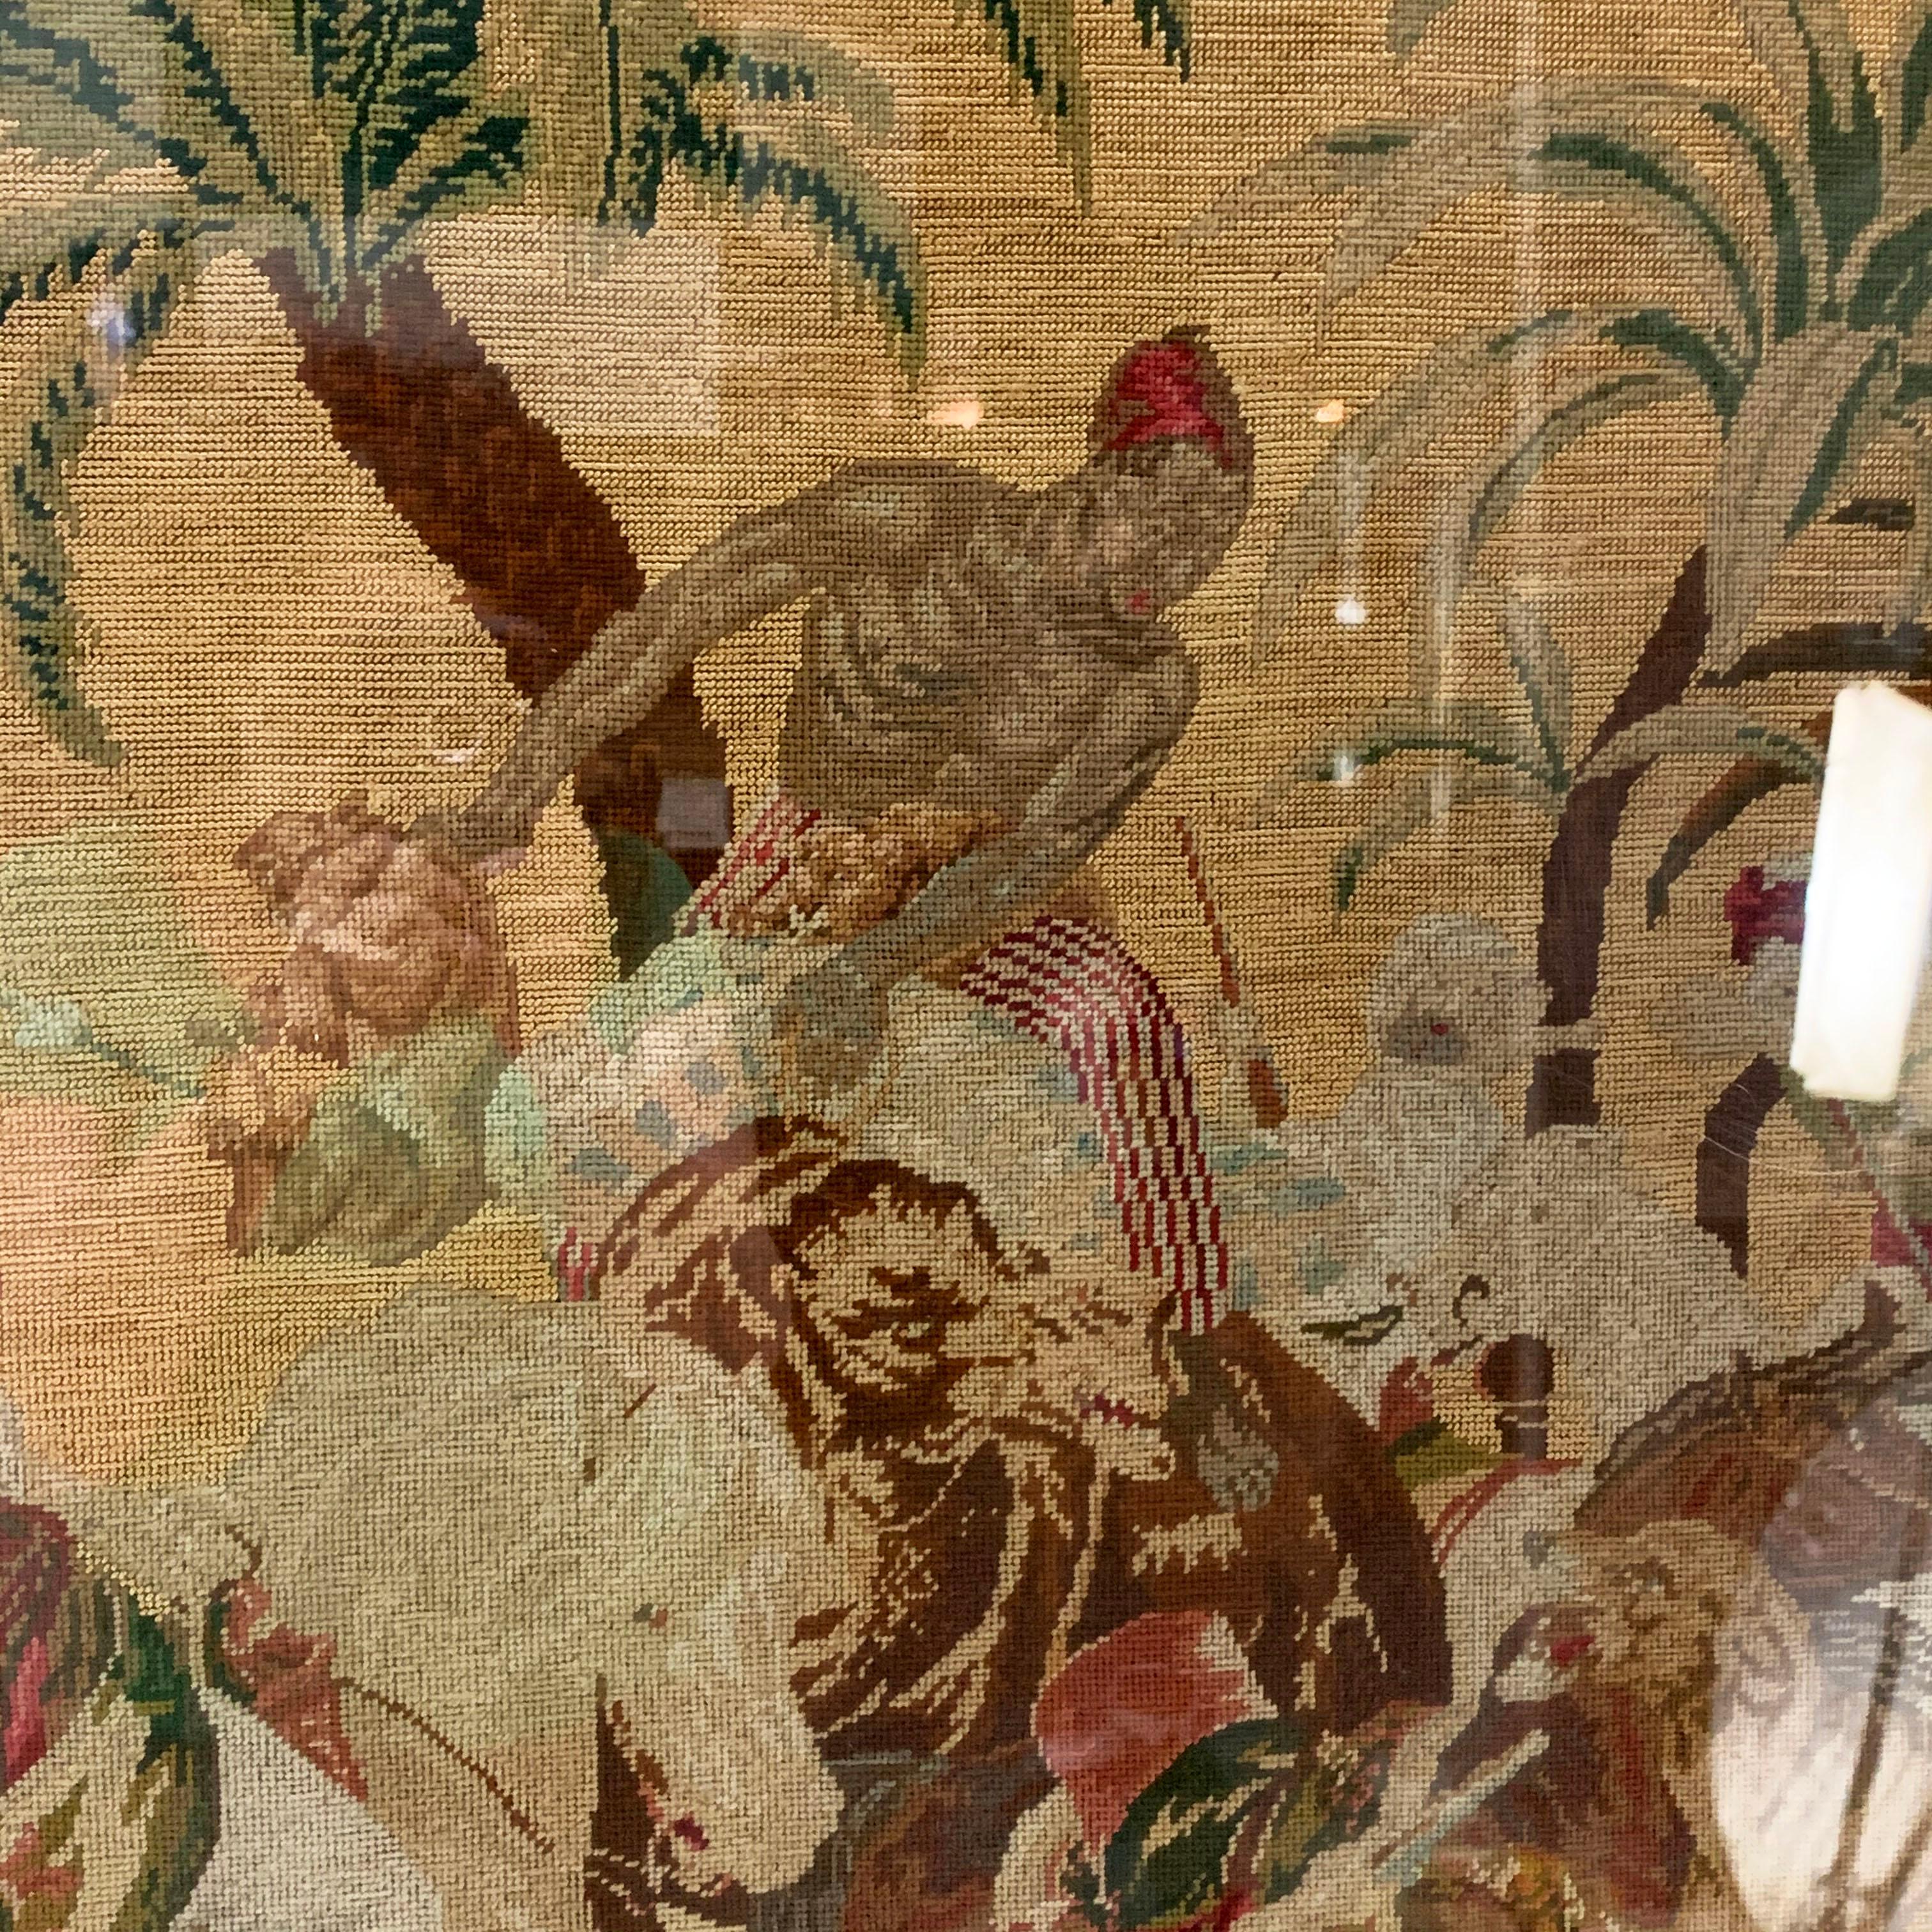 Framed (behind glass) 19th century Gobelin style Belgian woolwork tapestry depicting French artist Horace Vernet’s “Lion Hunt in the Sahara Desert, 28 May, 1833” .